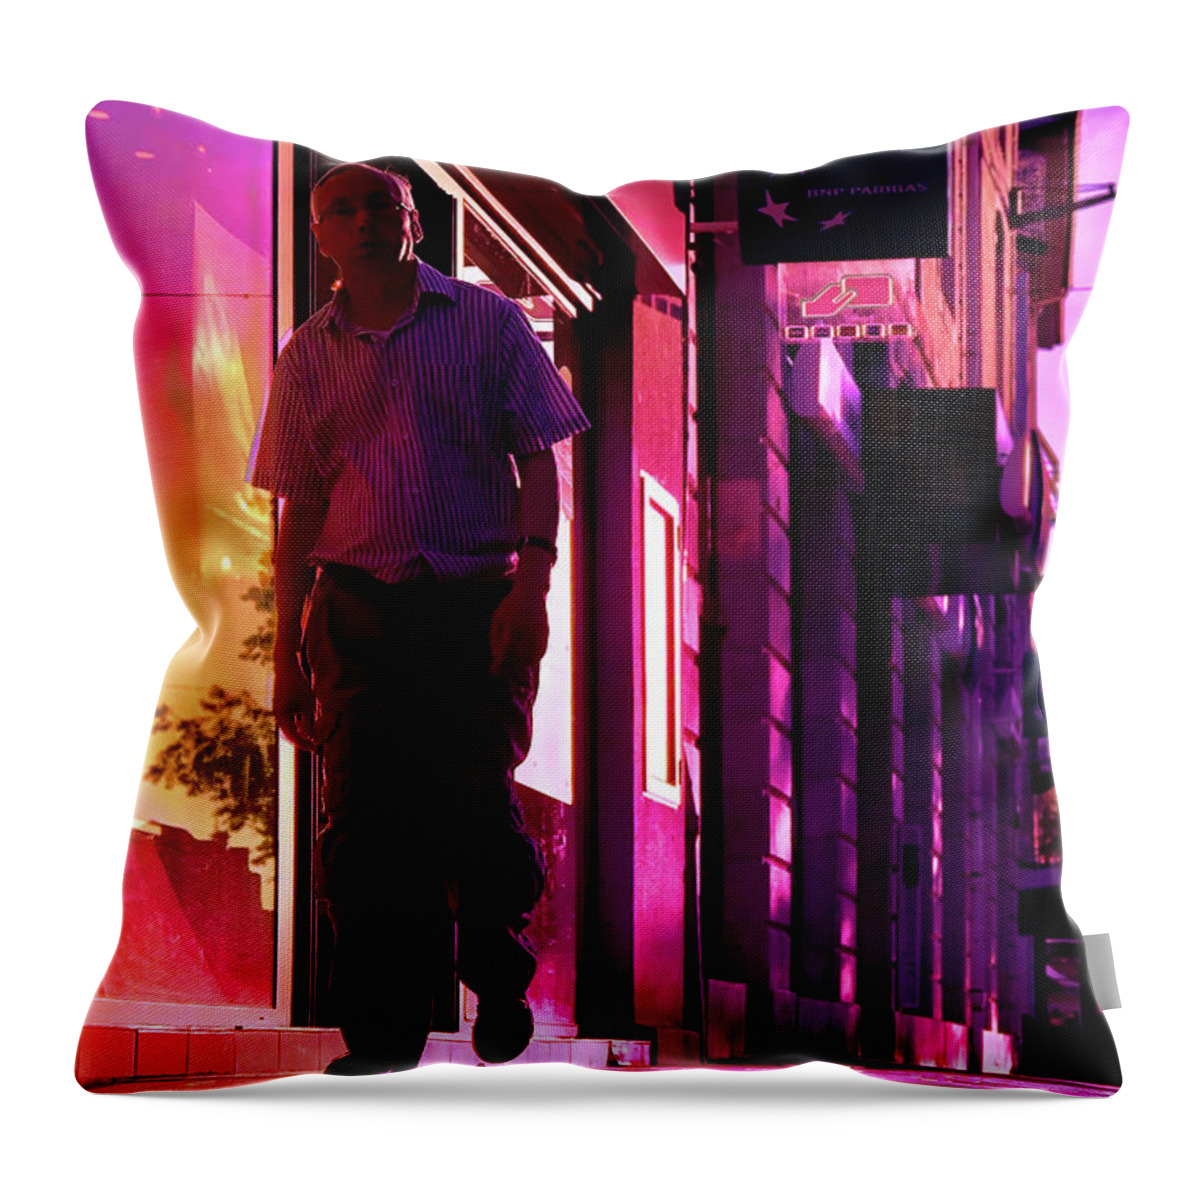 Buffy The Vampire Slayer Throw Pillow featuring the photograph Travis Bickle by Nicholas Brendon